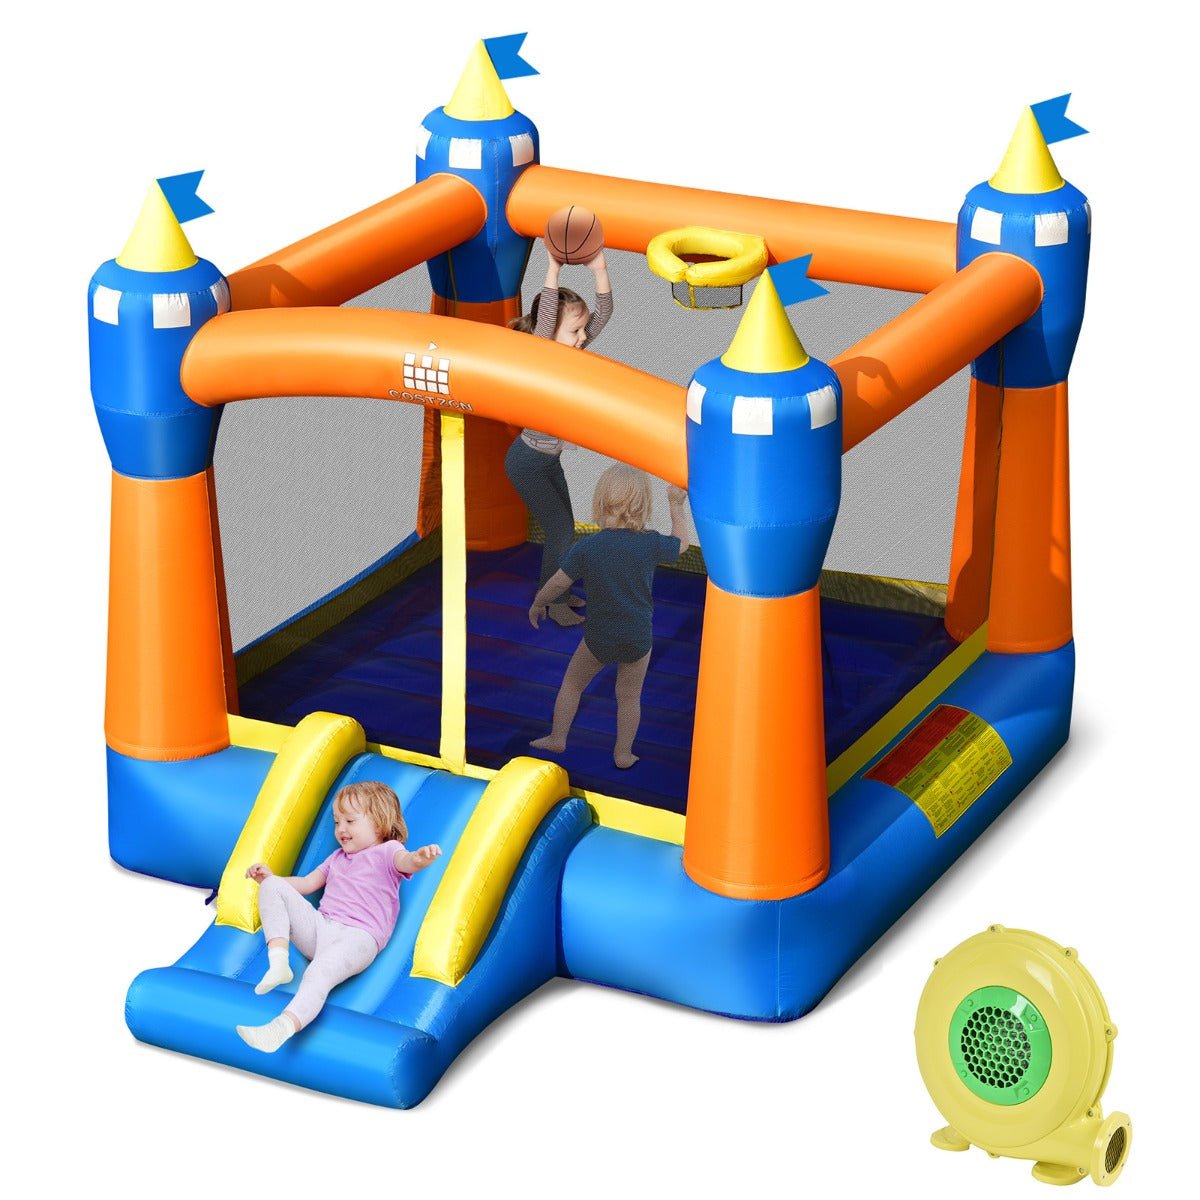 Kids Inflatable Castle Bounce House with Jumping Area - Royal Fun